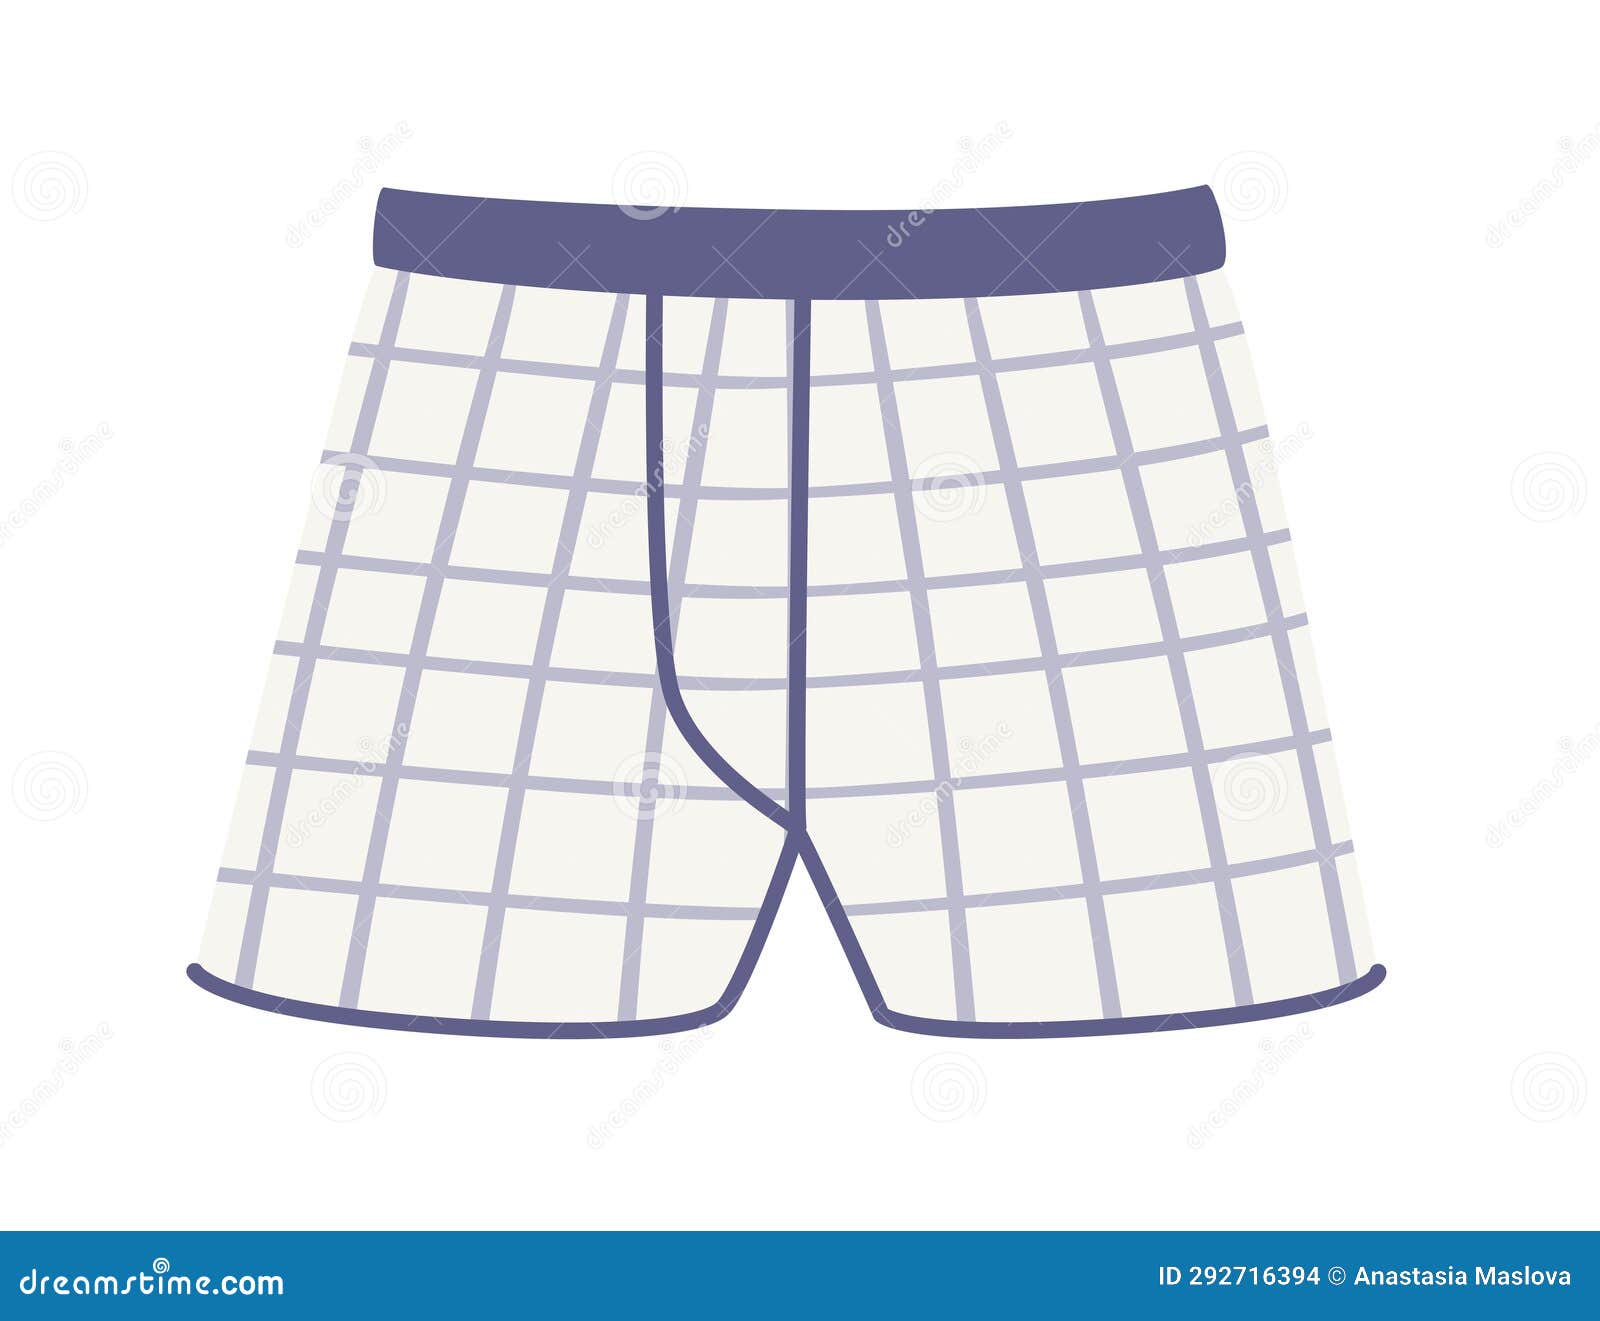 Men Underpants White Color Vector Illustration Isolated on White ...